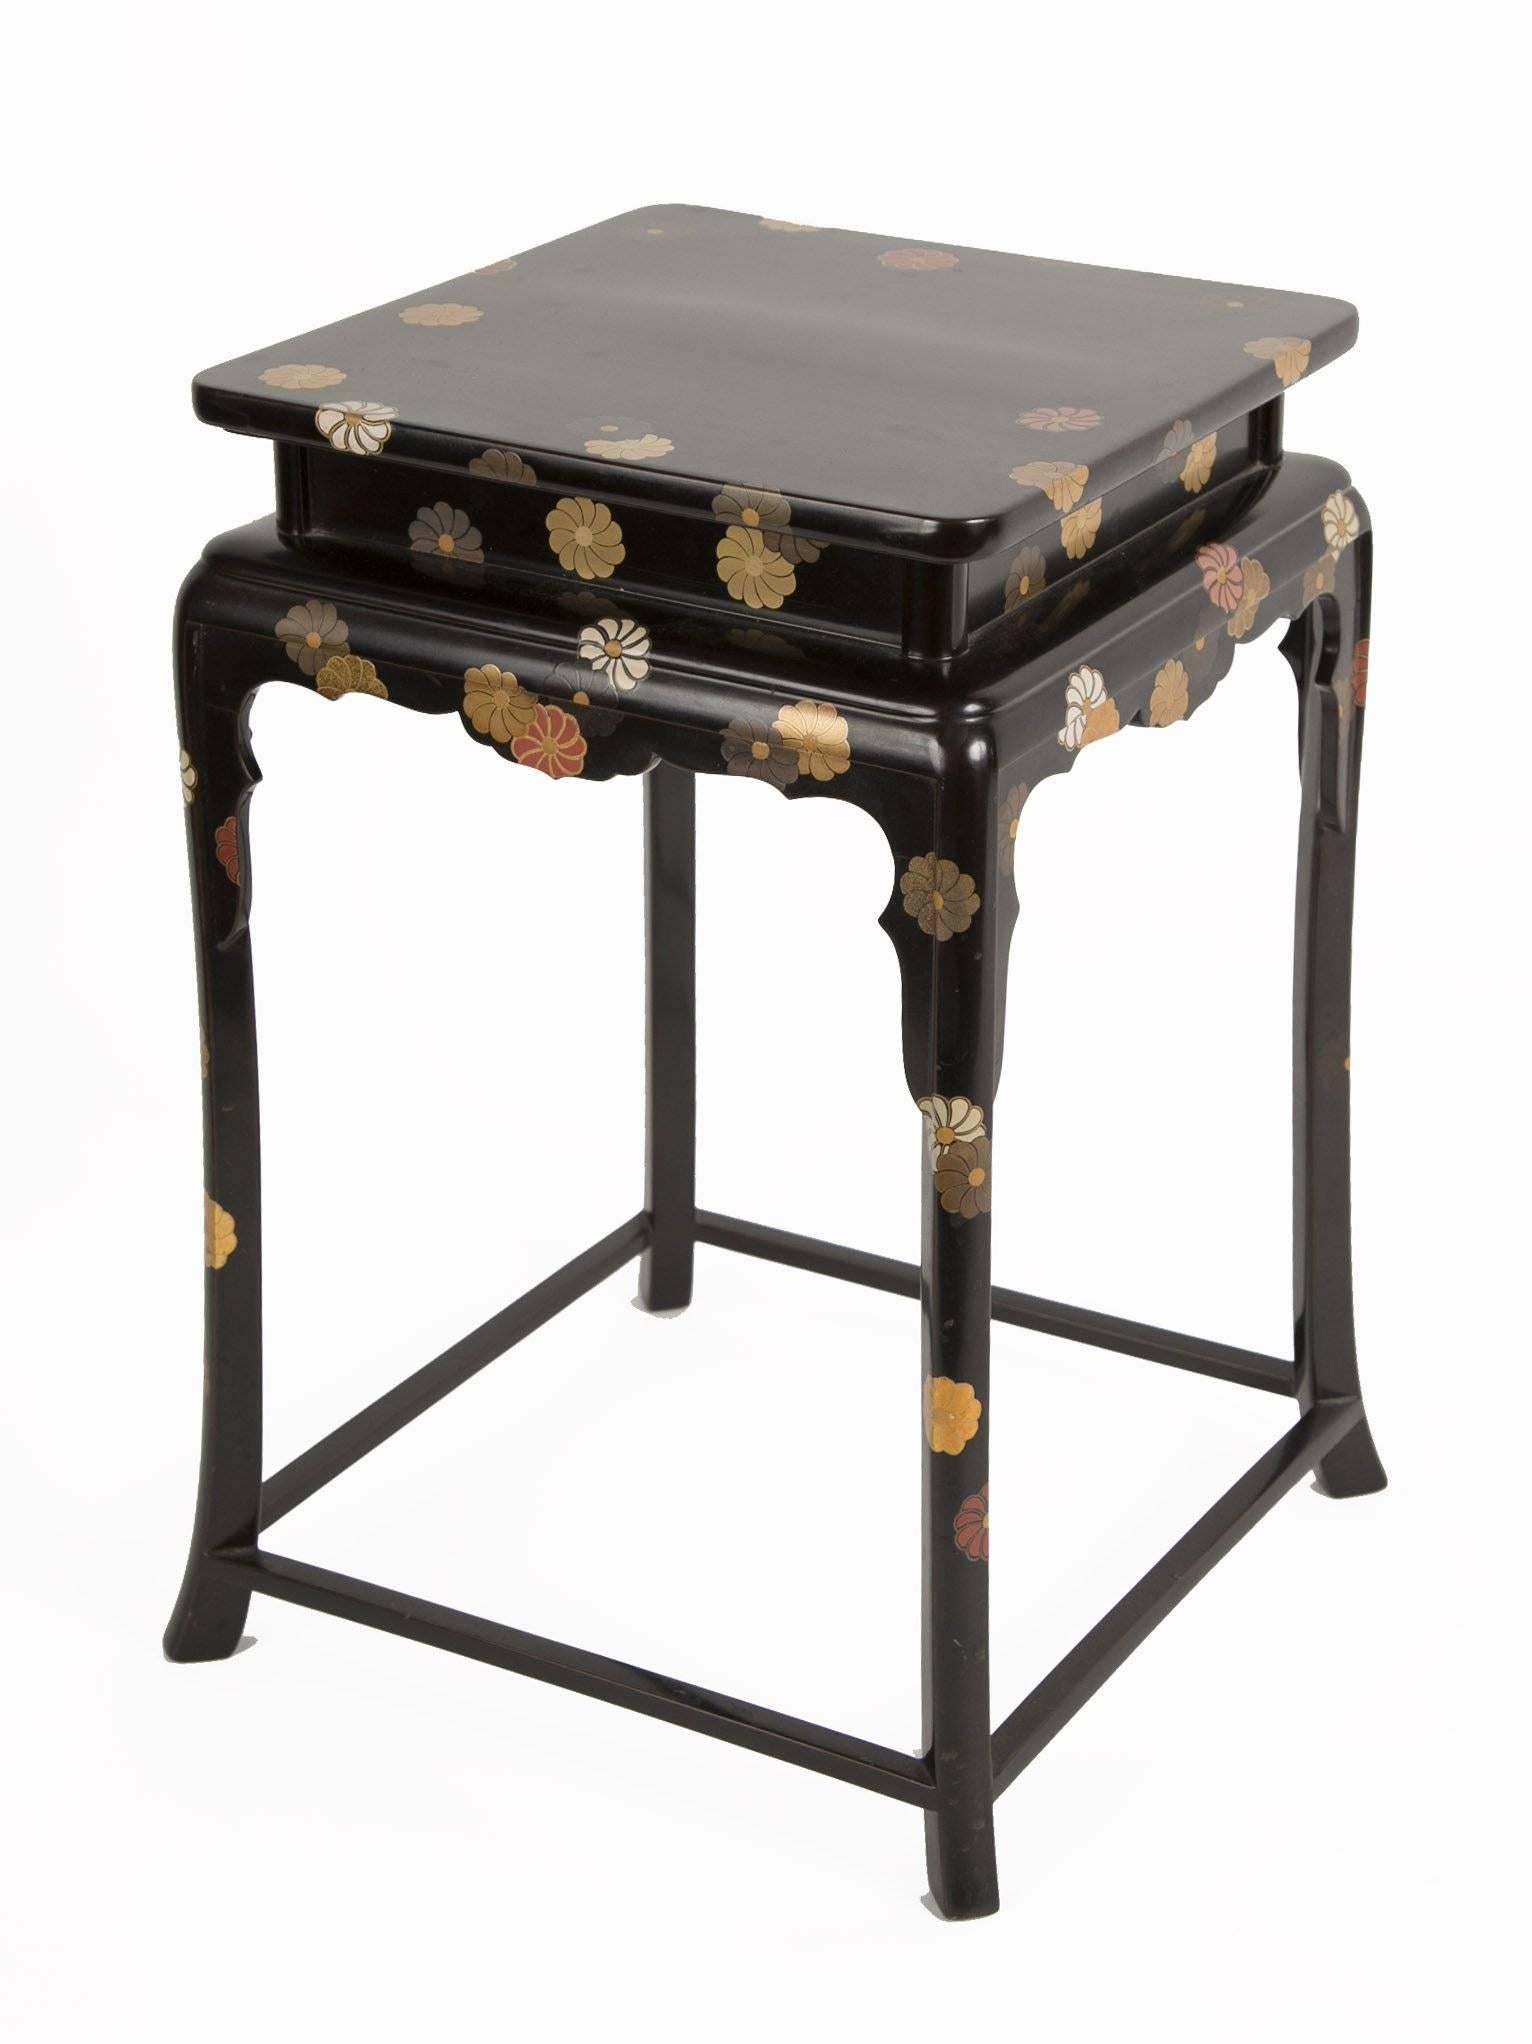 Taisho Japanese Black Lacquered Cocktail Table With Chrysanthemum Design